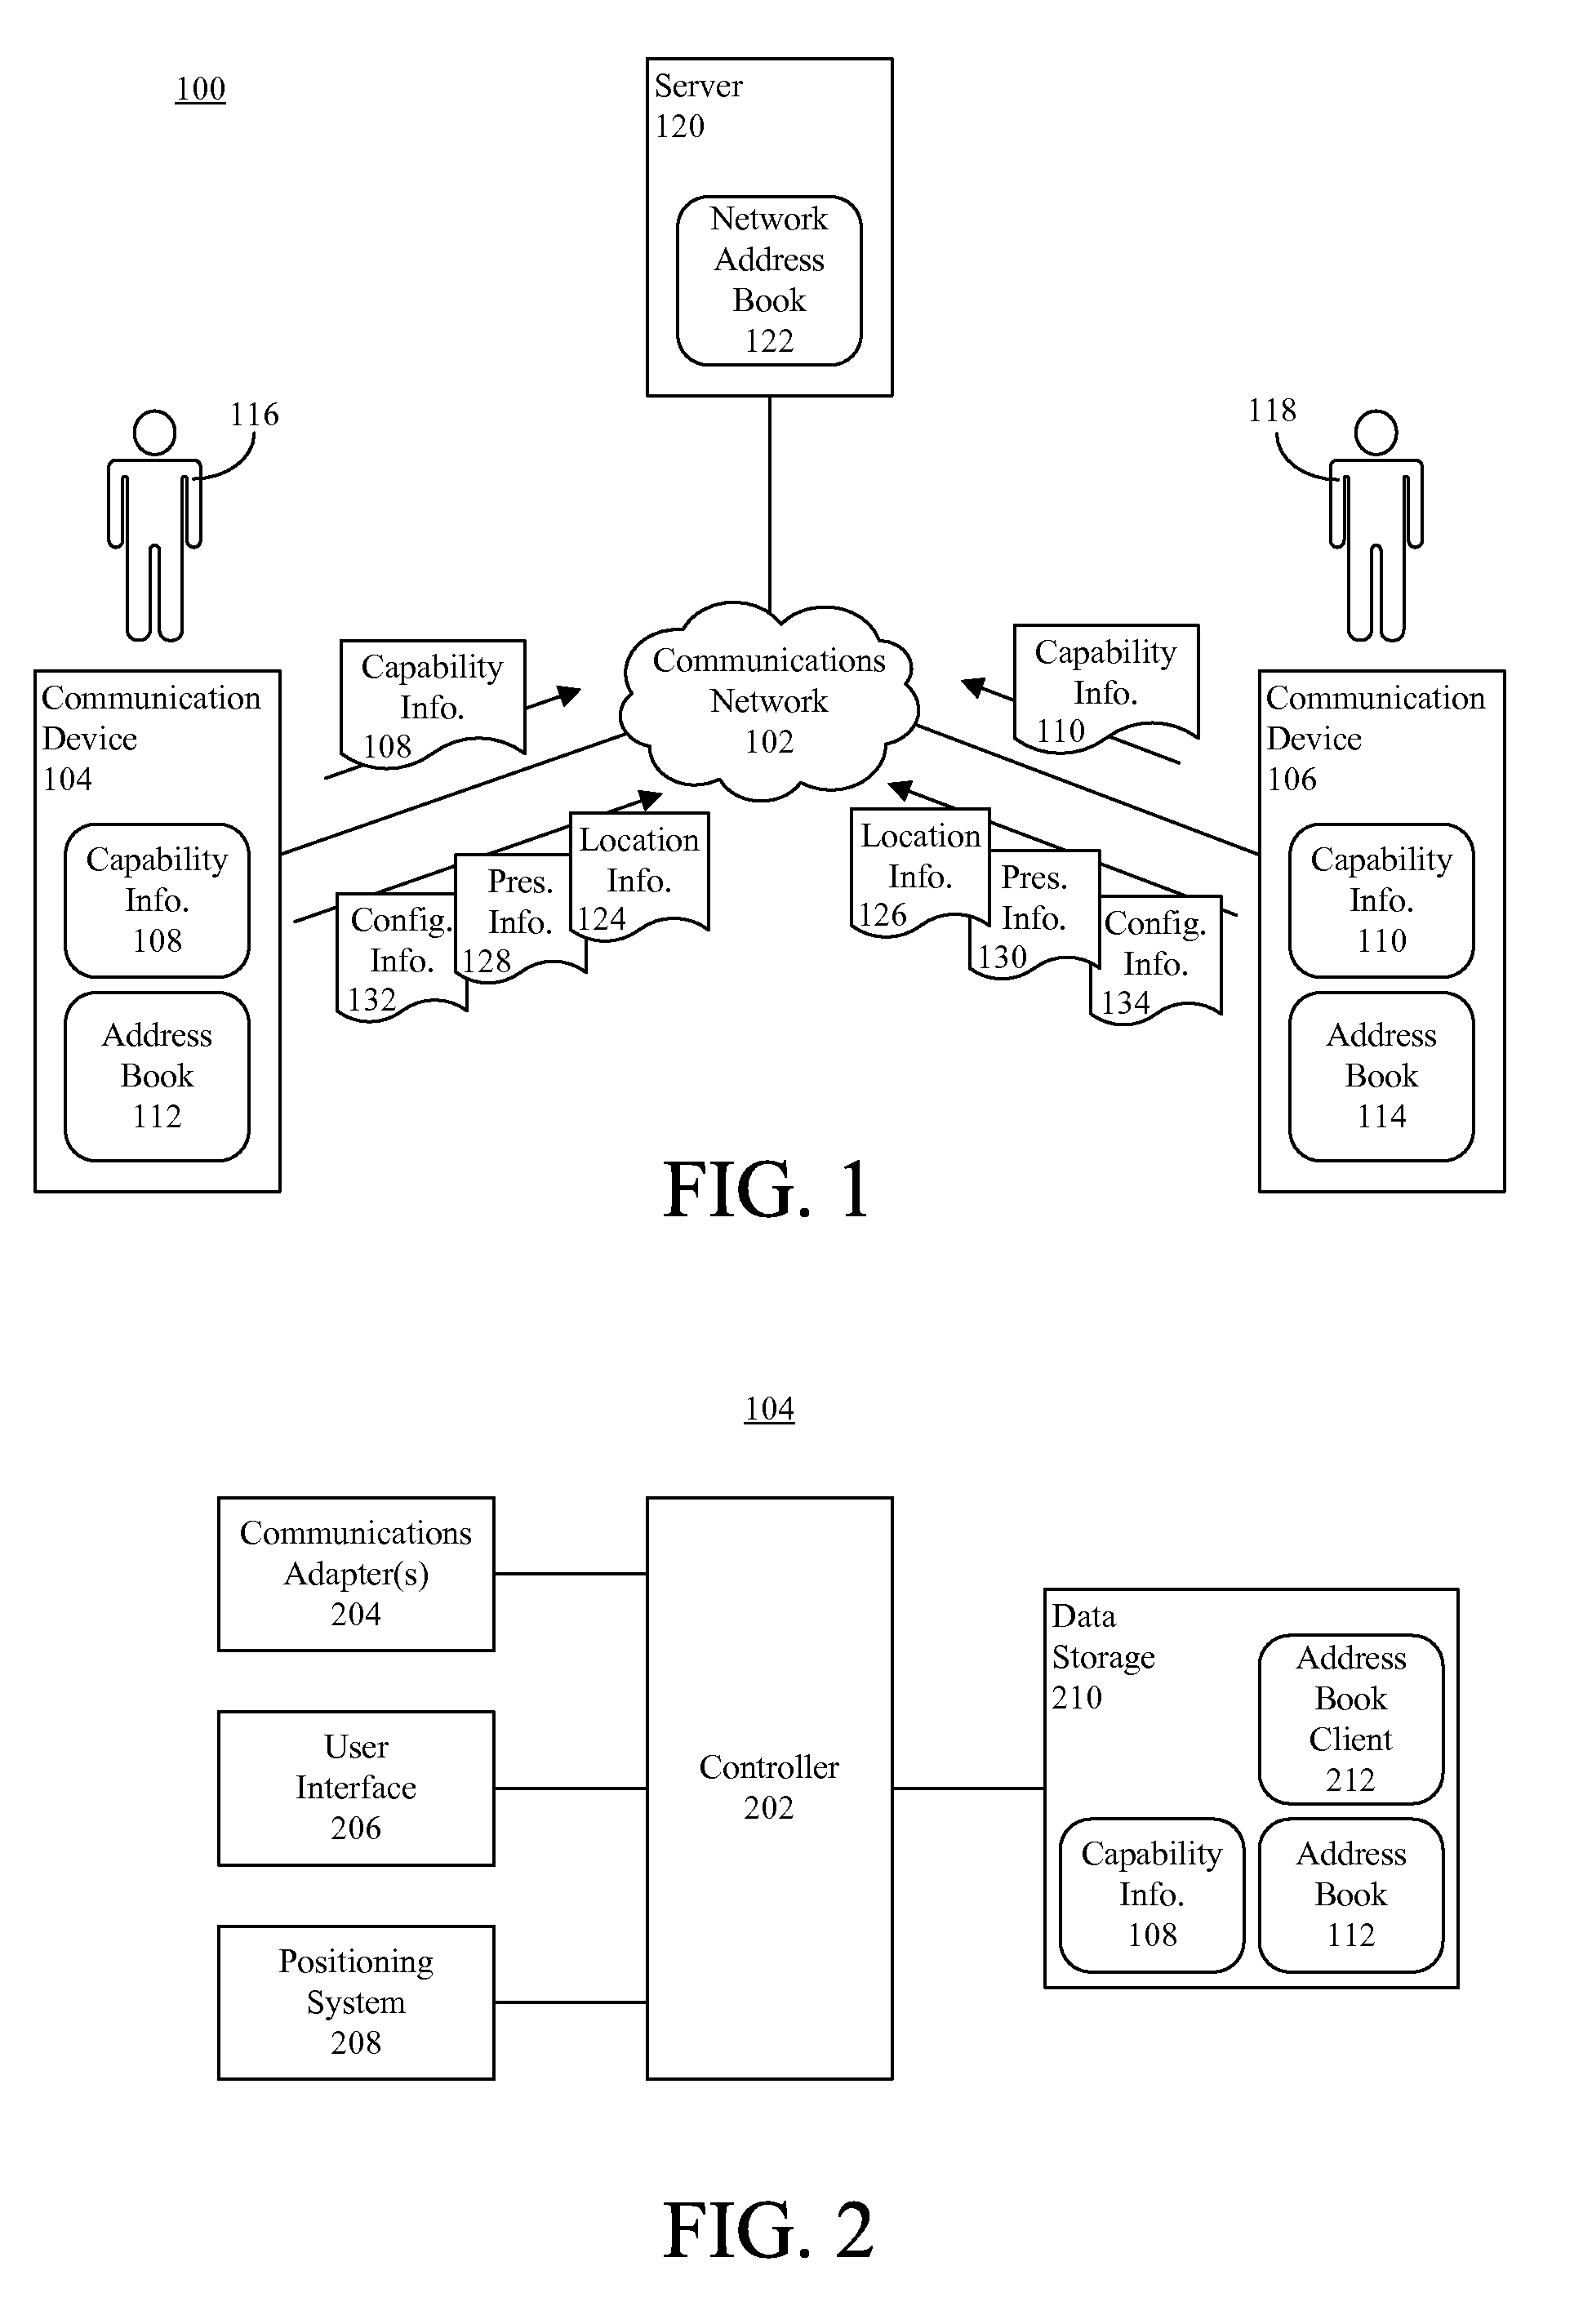 Storing device capability information in an address book